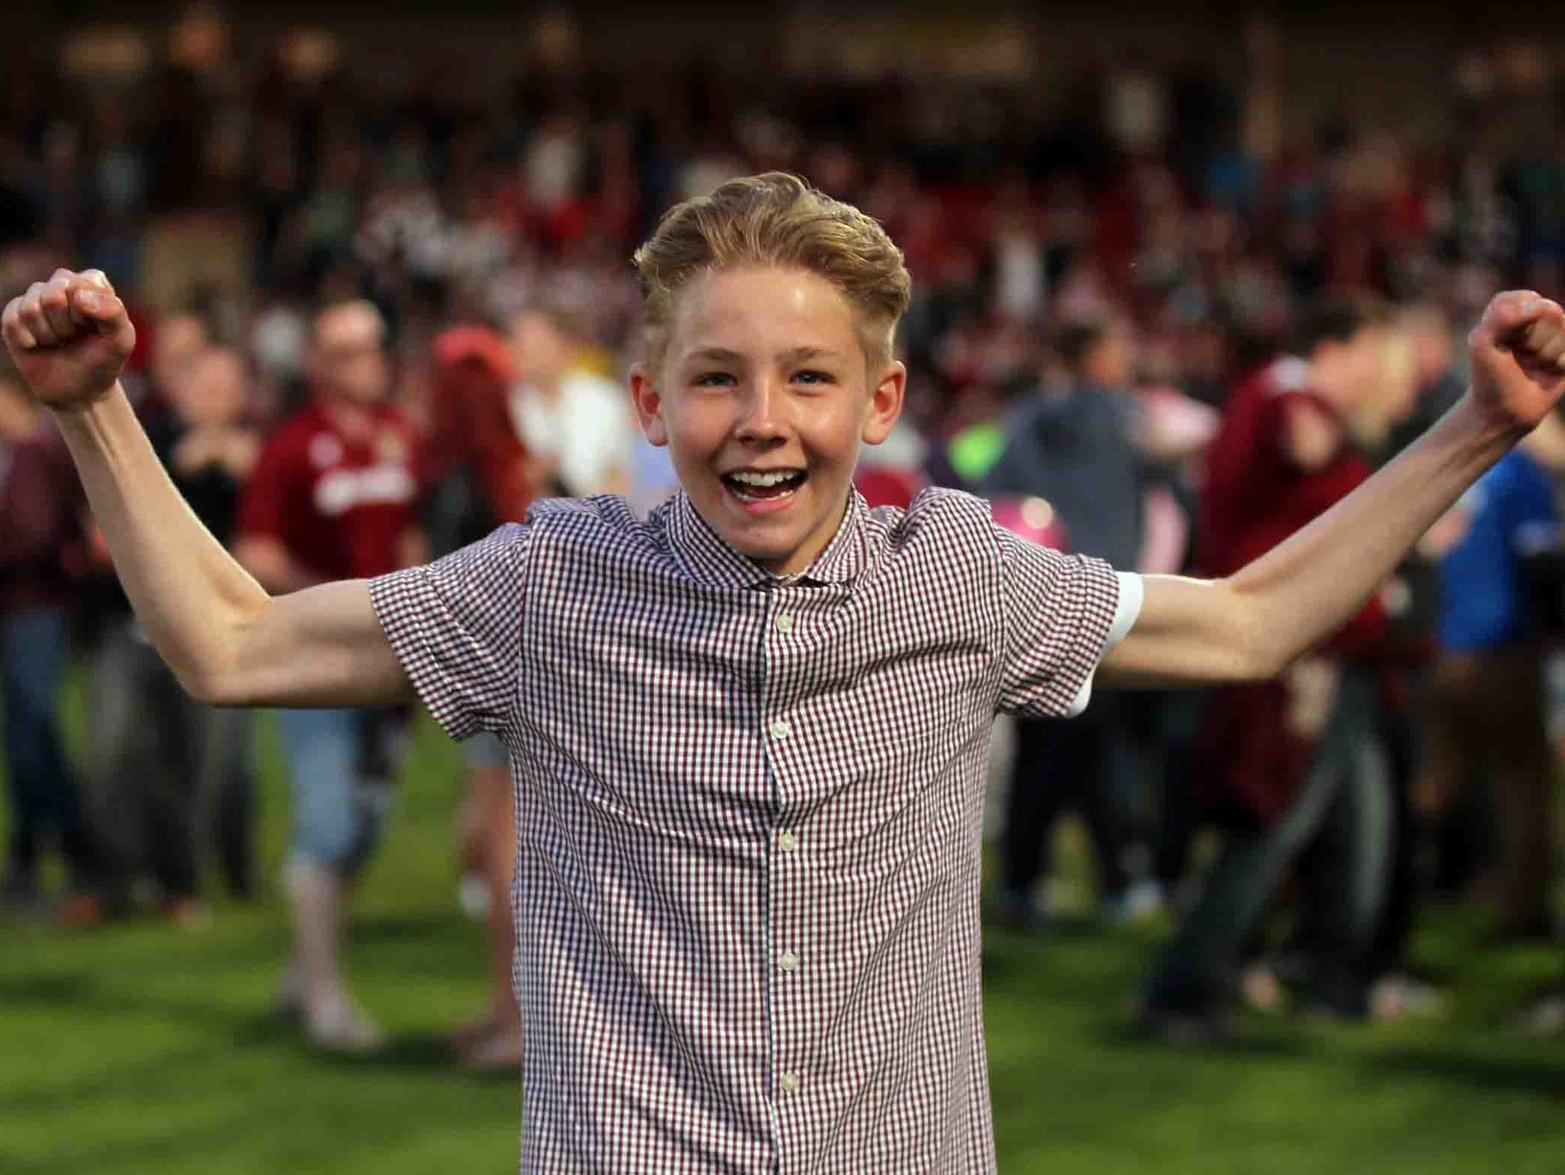 This young supporter certainly enjoyed the Cobblers' win over Cheltenham